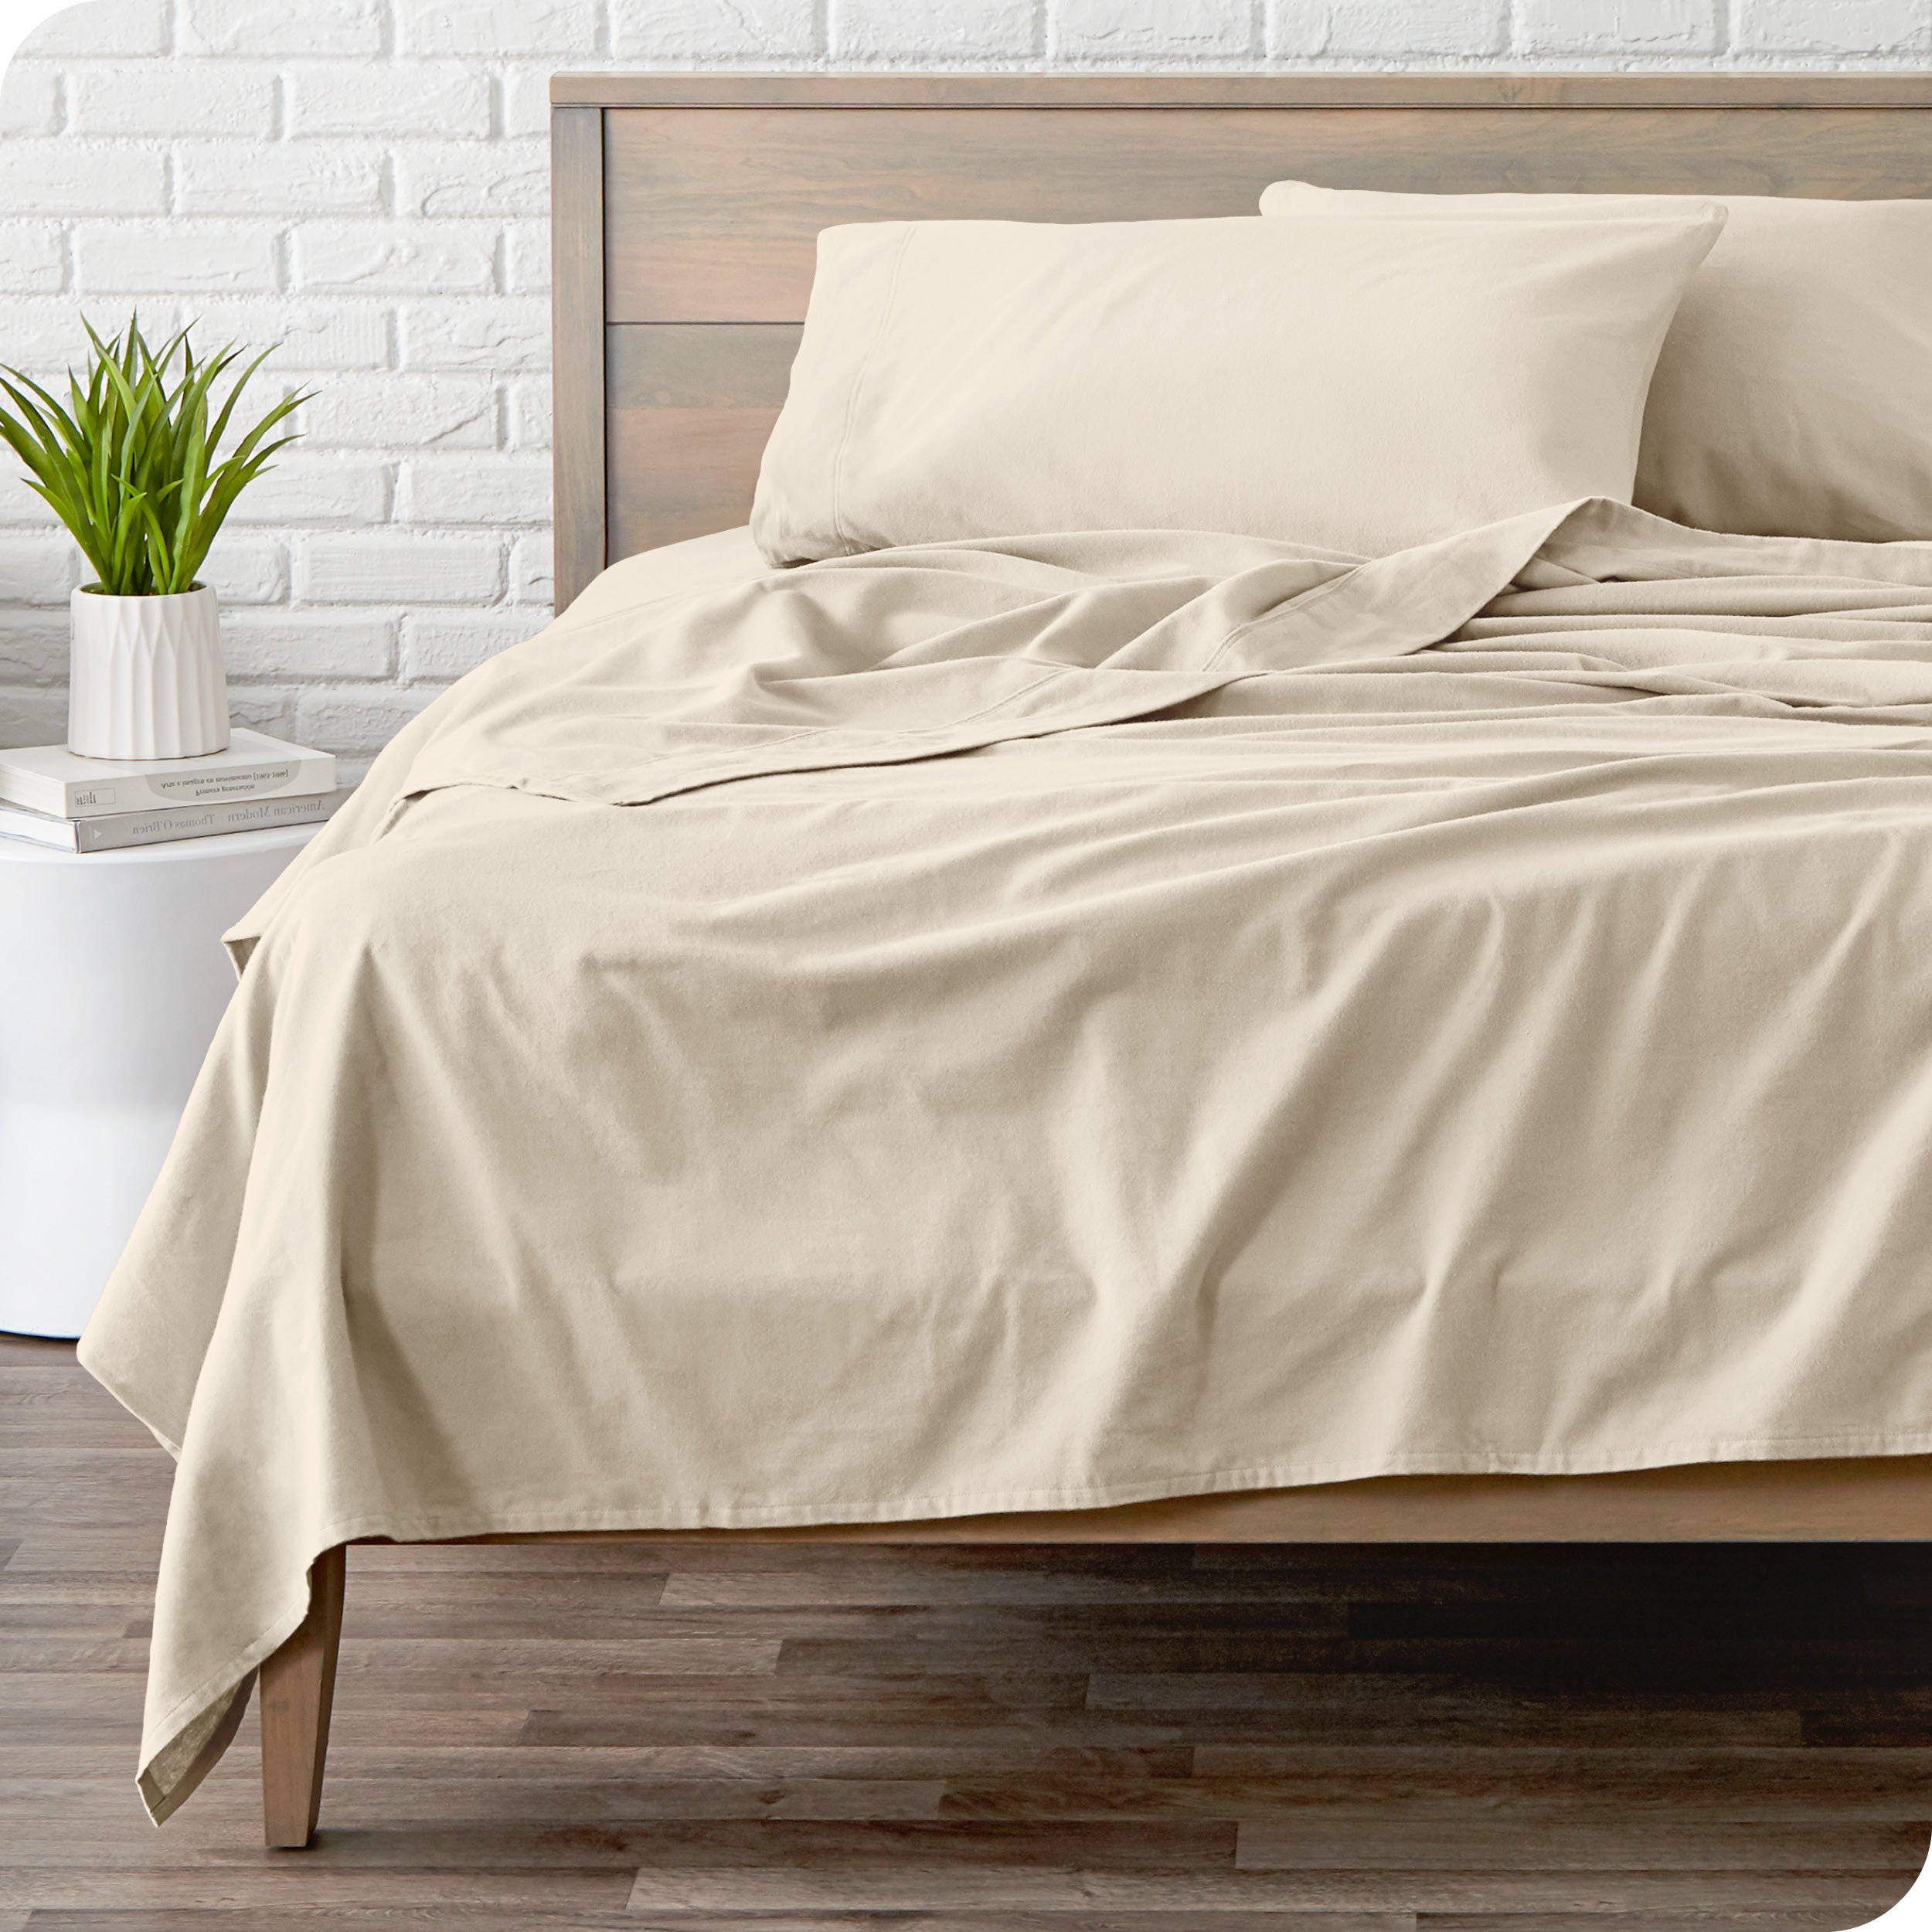 A modern bed with a flannel sheet set on